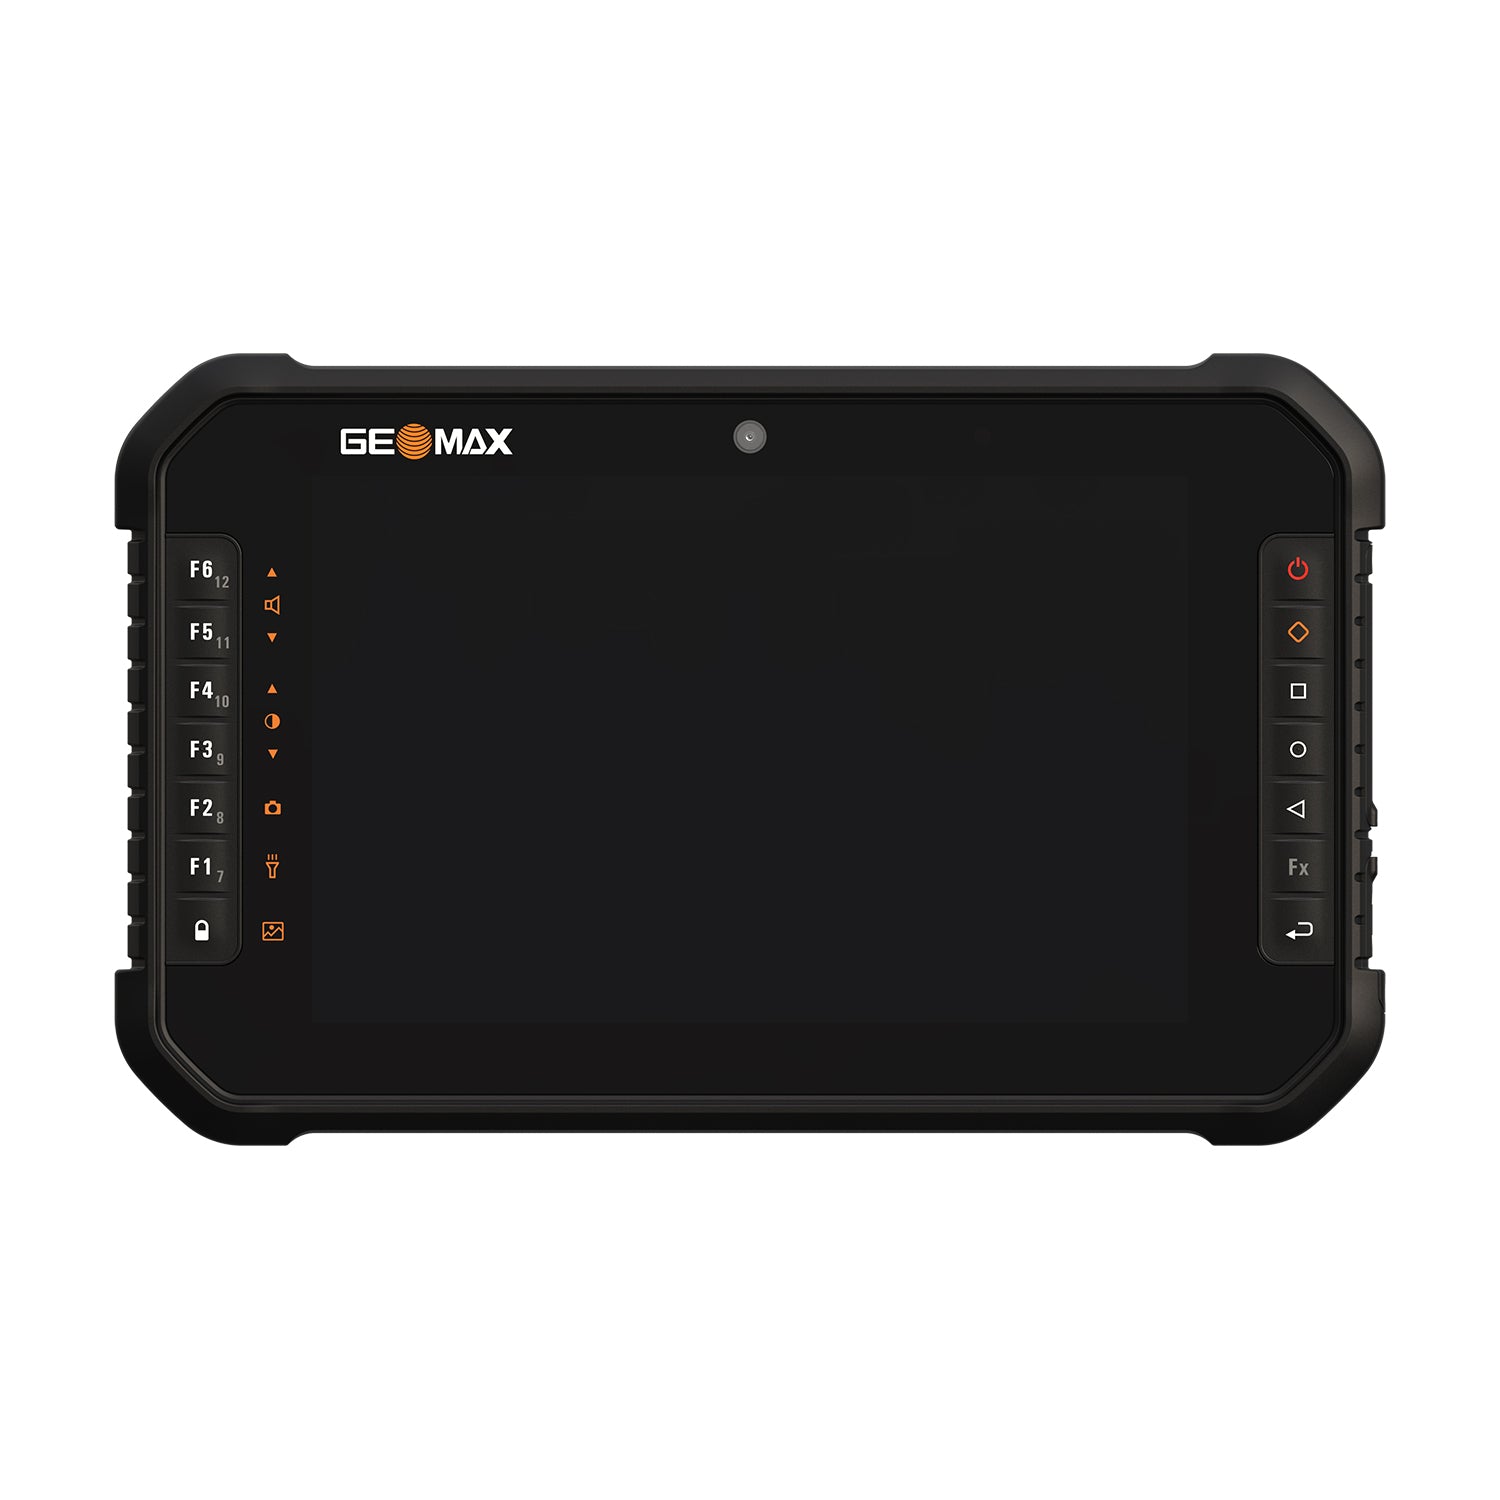 GeoMax Zenius08 Tablet, Android OS -Data Collectors- eGPS Solutions Inc.